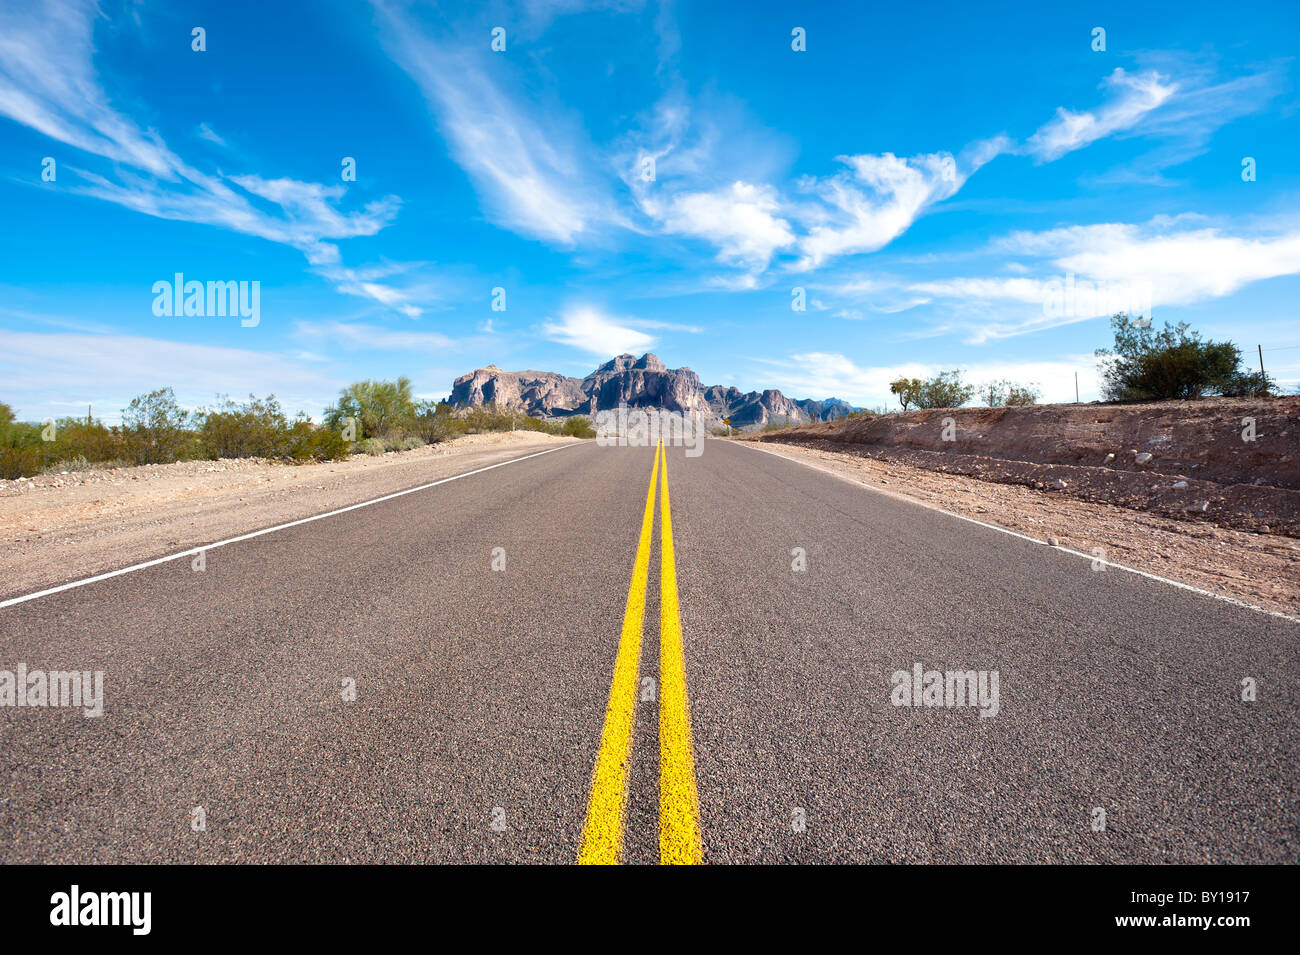 A remote and deserted desert road with a beautiful sky. Stock Photo